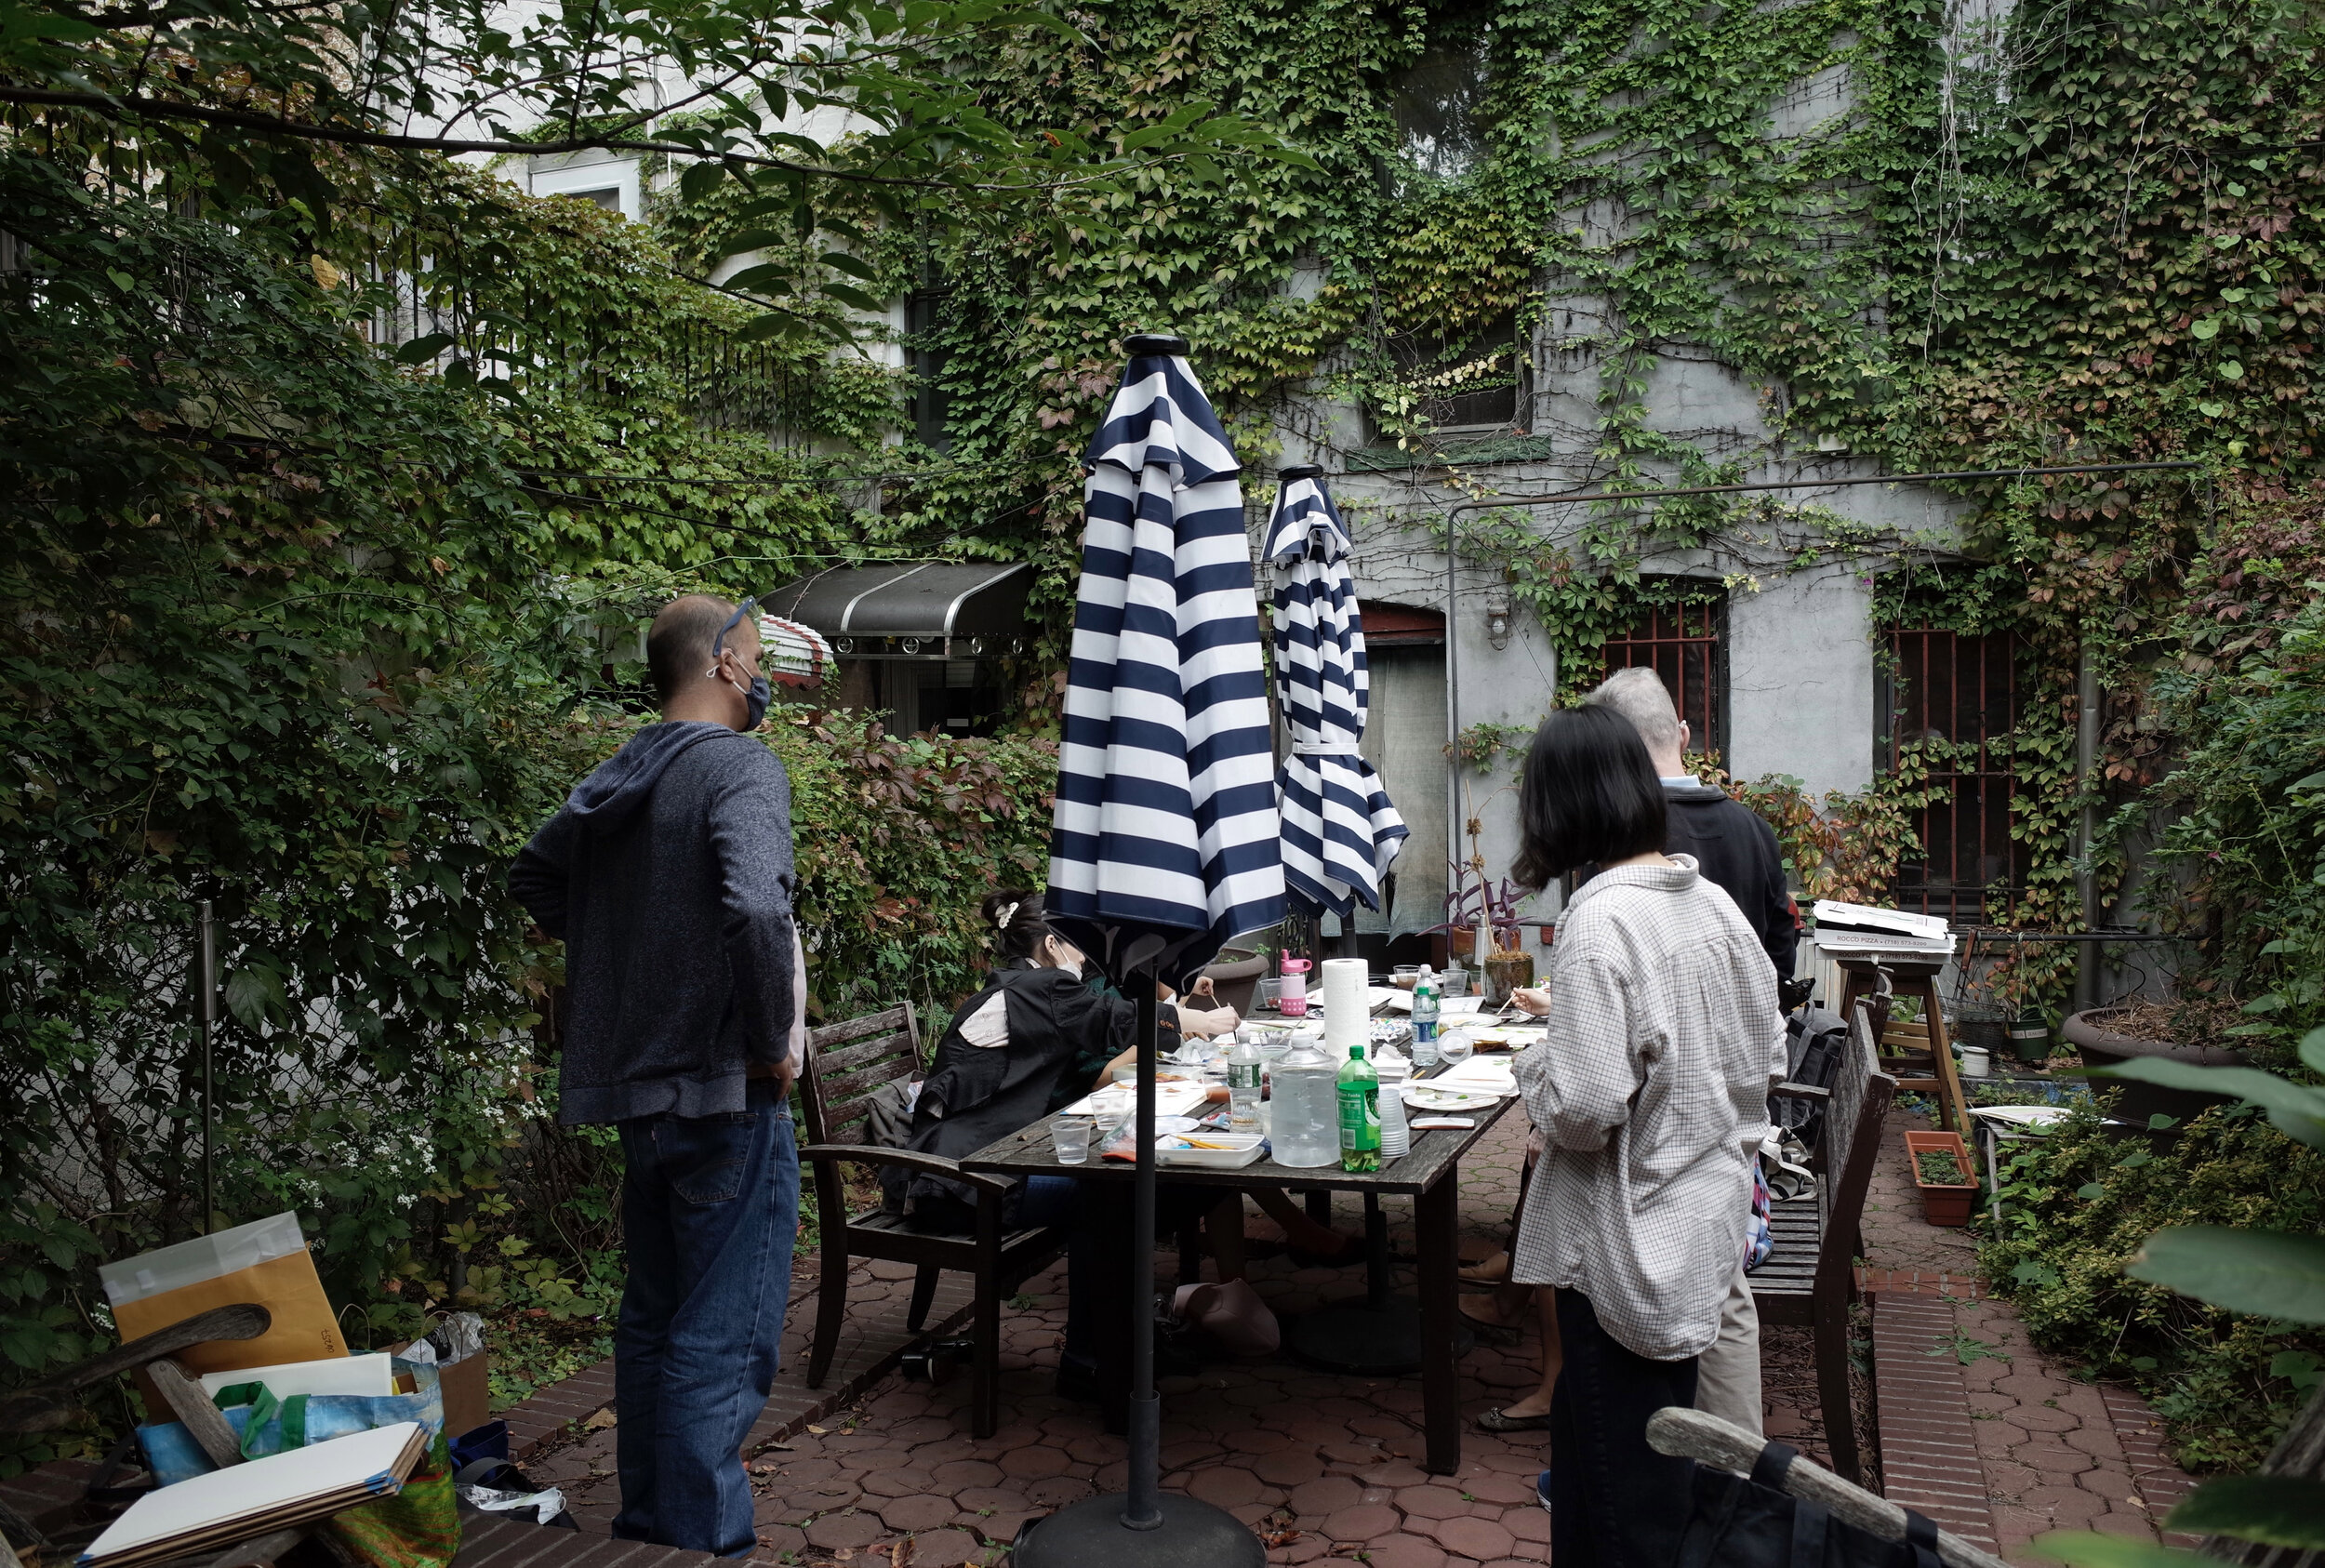  Plein Air Worshop at Fou Gallery. Photo by Mingzi Ma, courtesy of Fou Gallery 